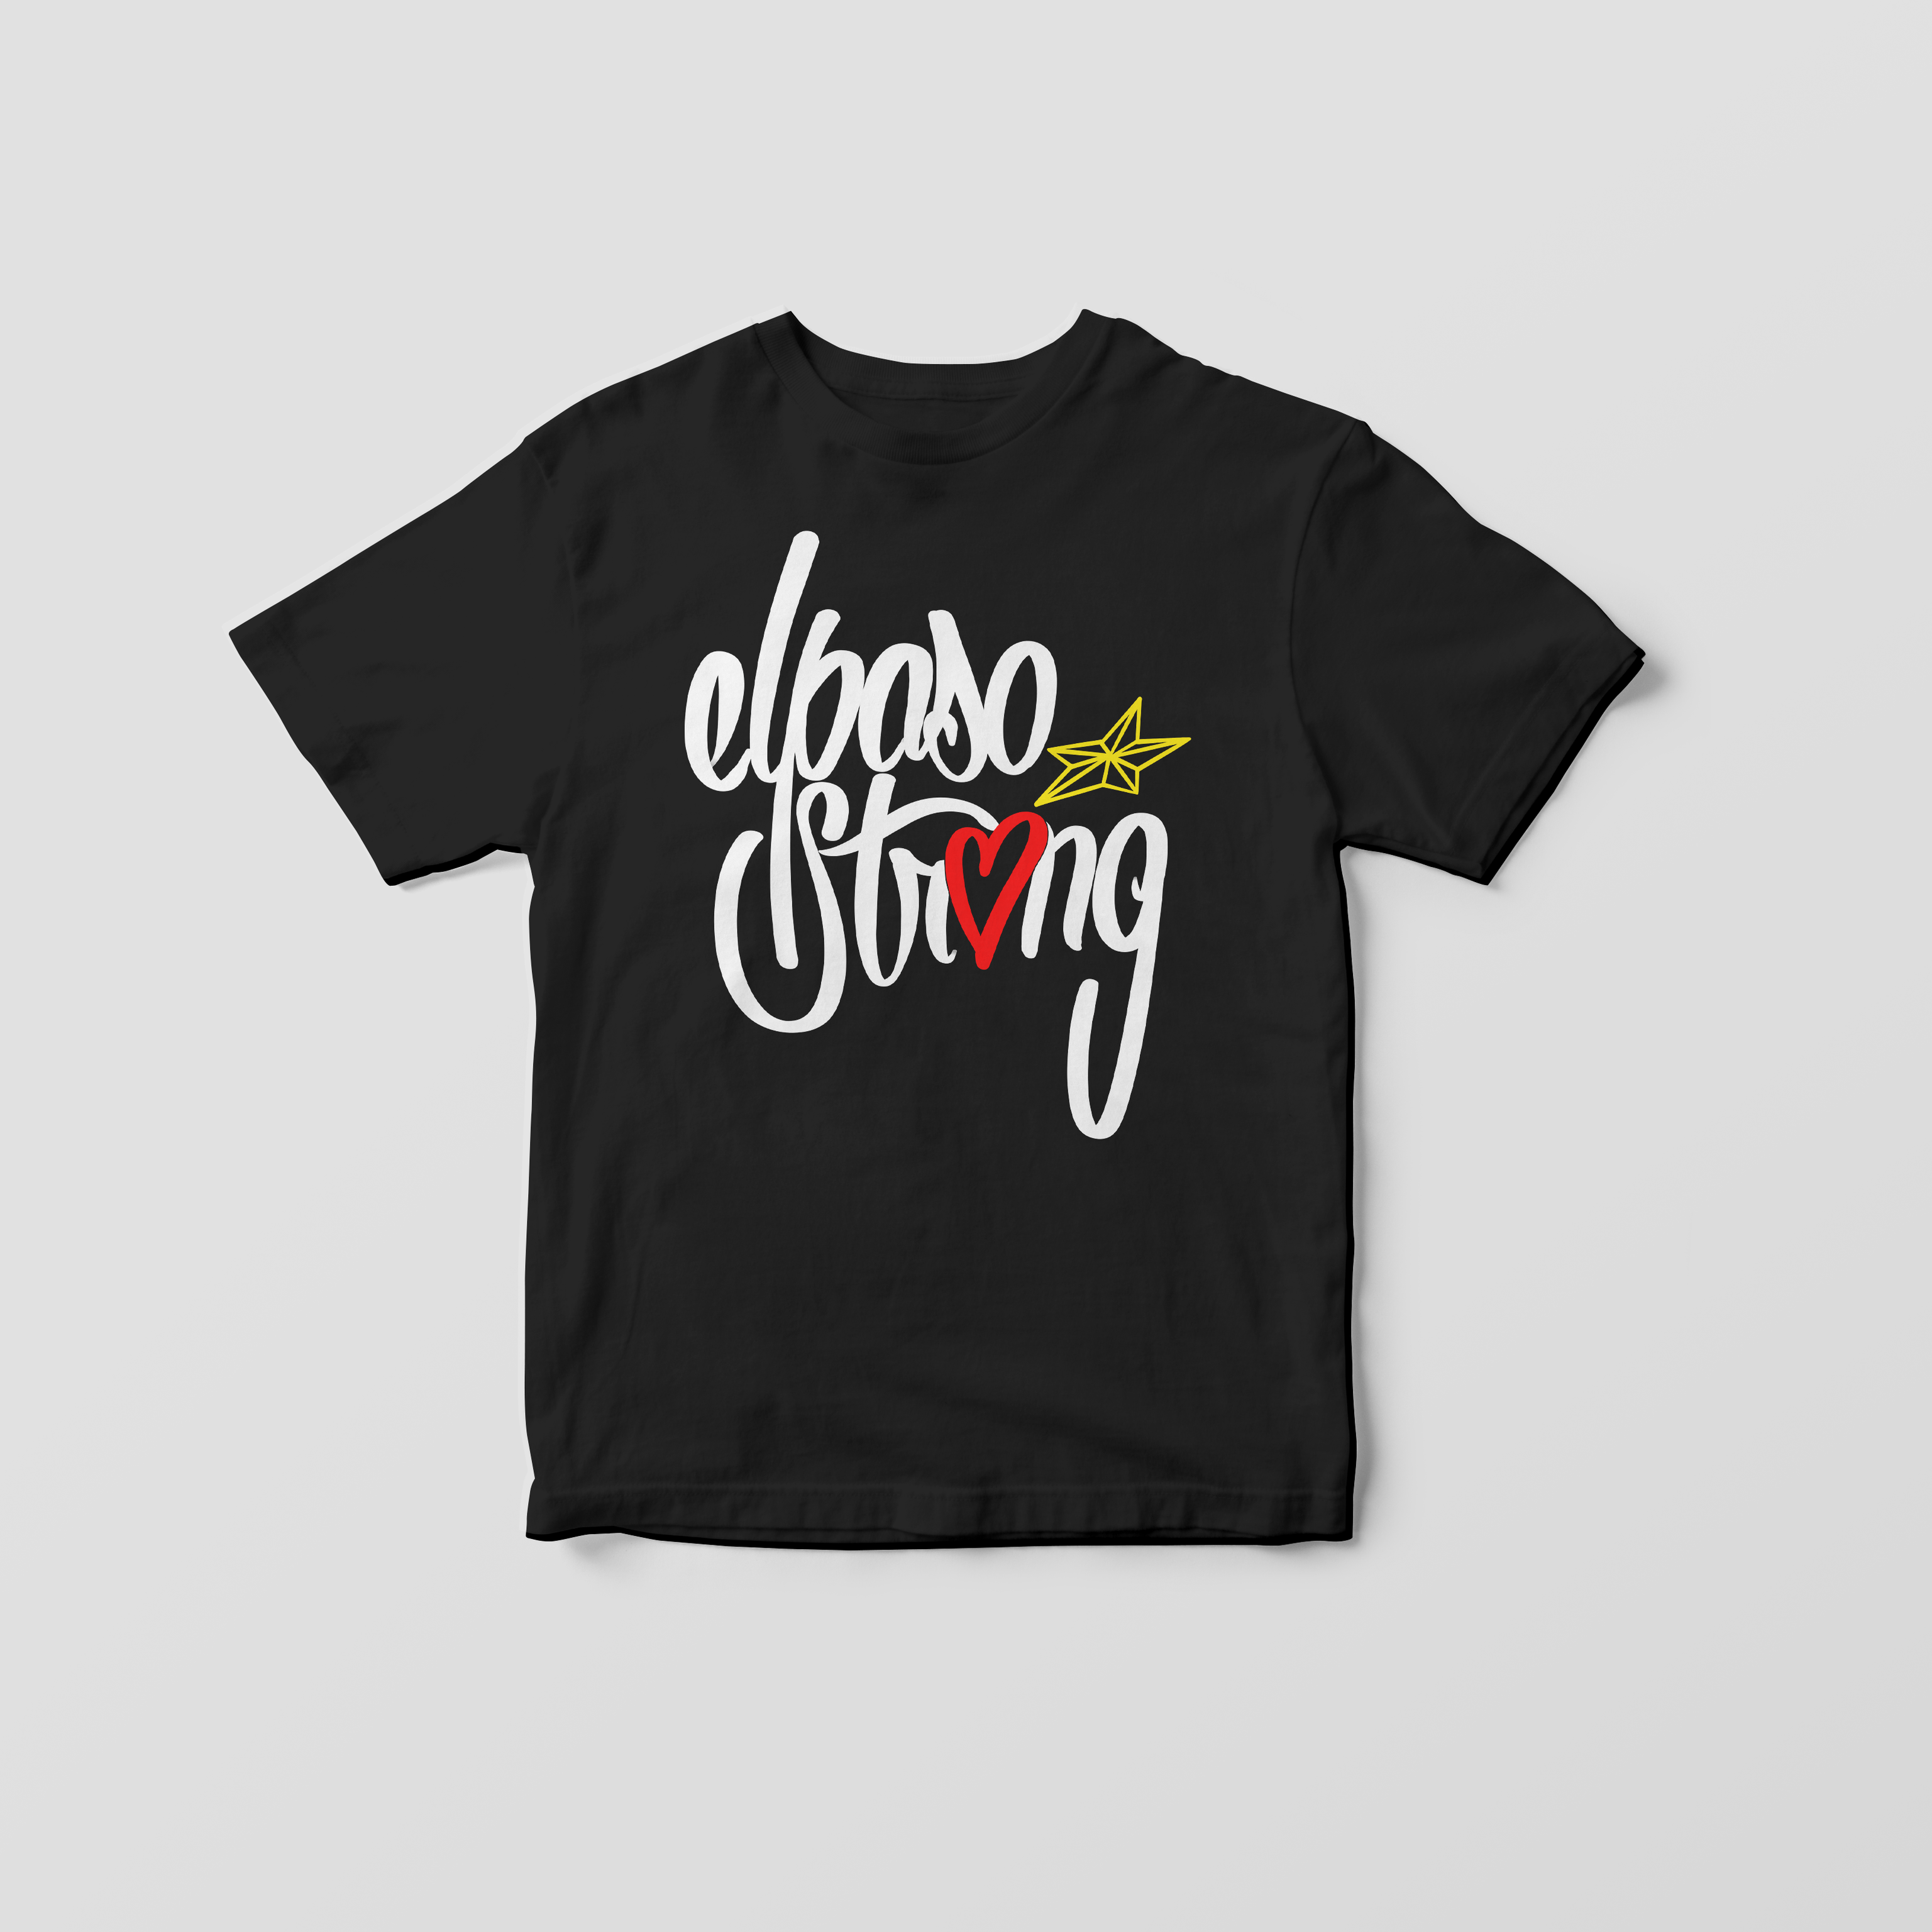 El Paso Strong Youth T-Shirt by Alex Arriaga (LX_1984)